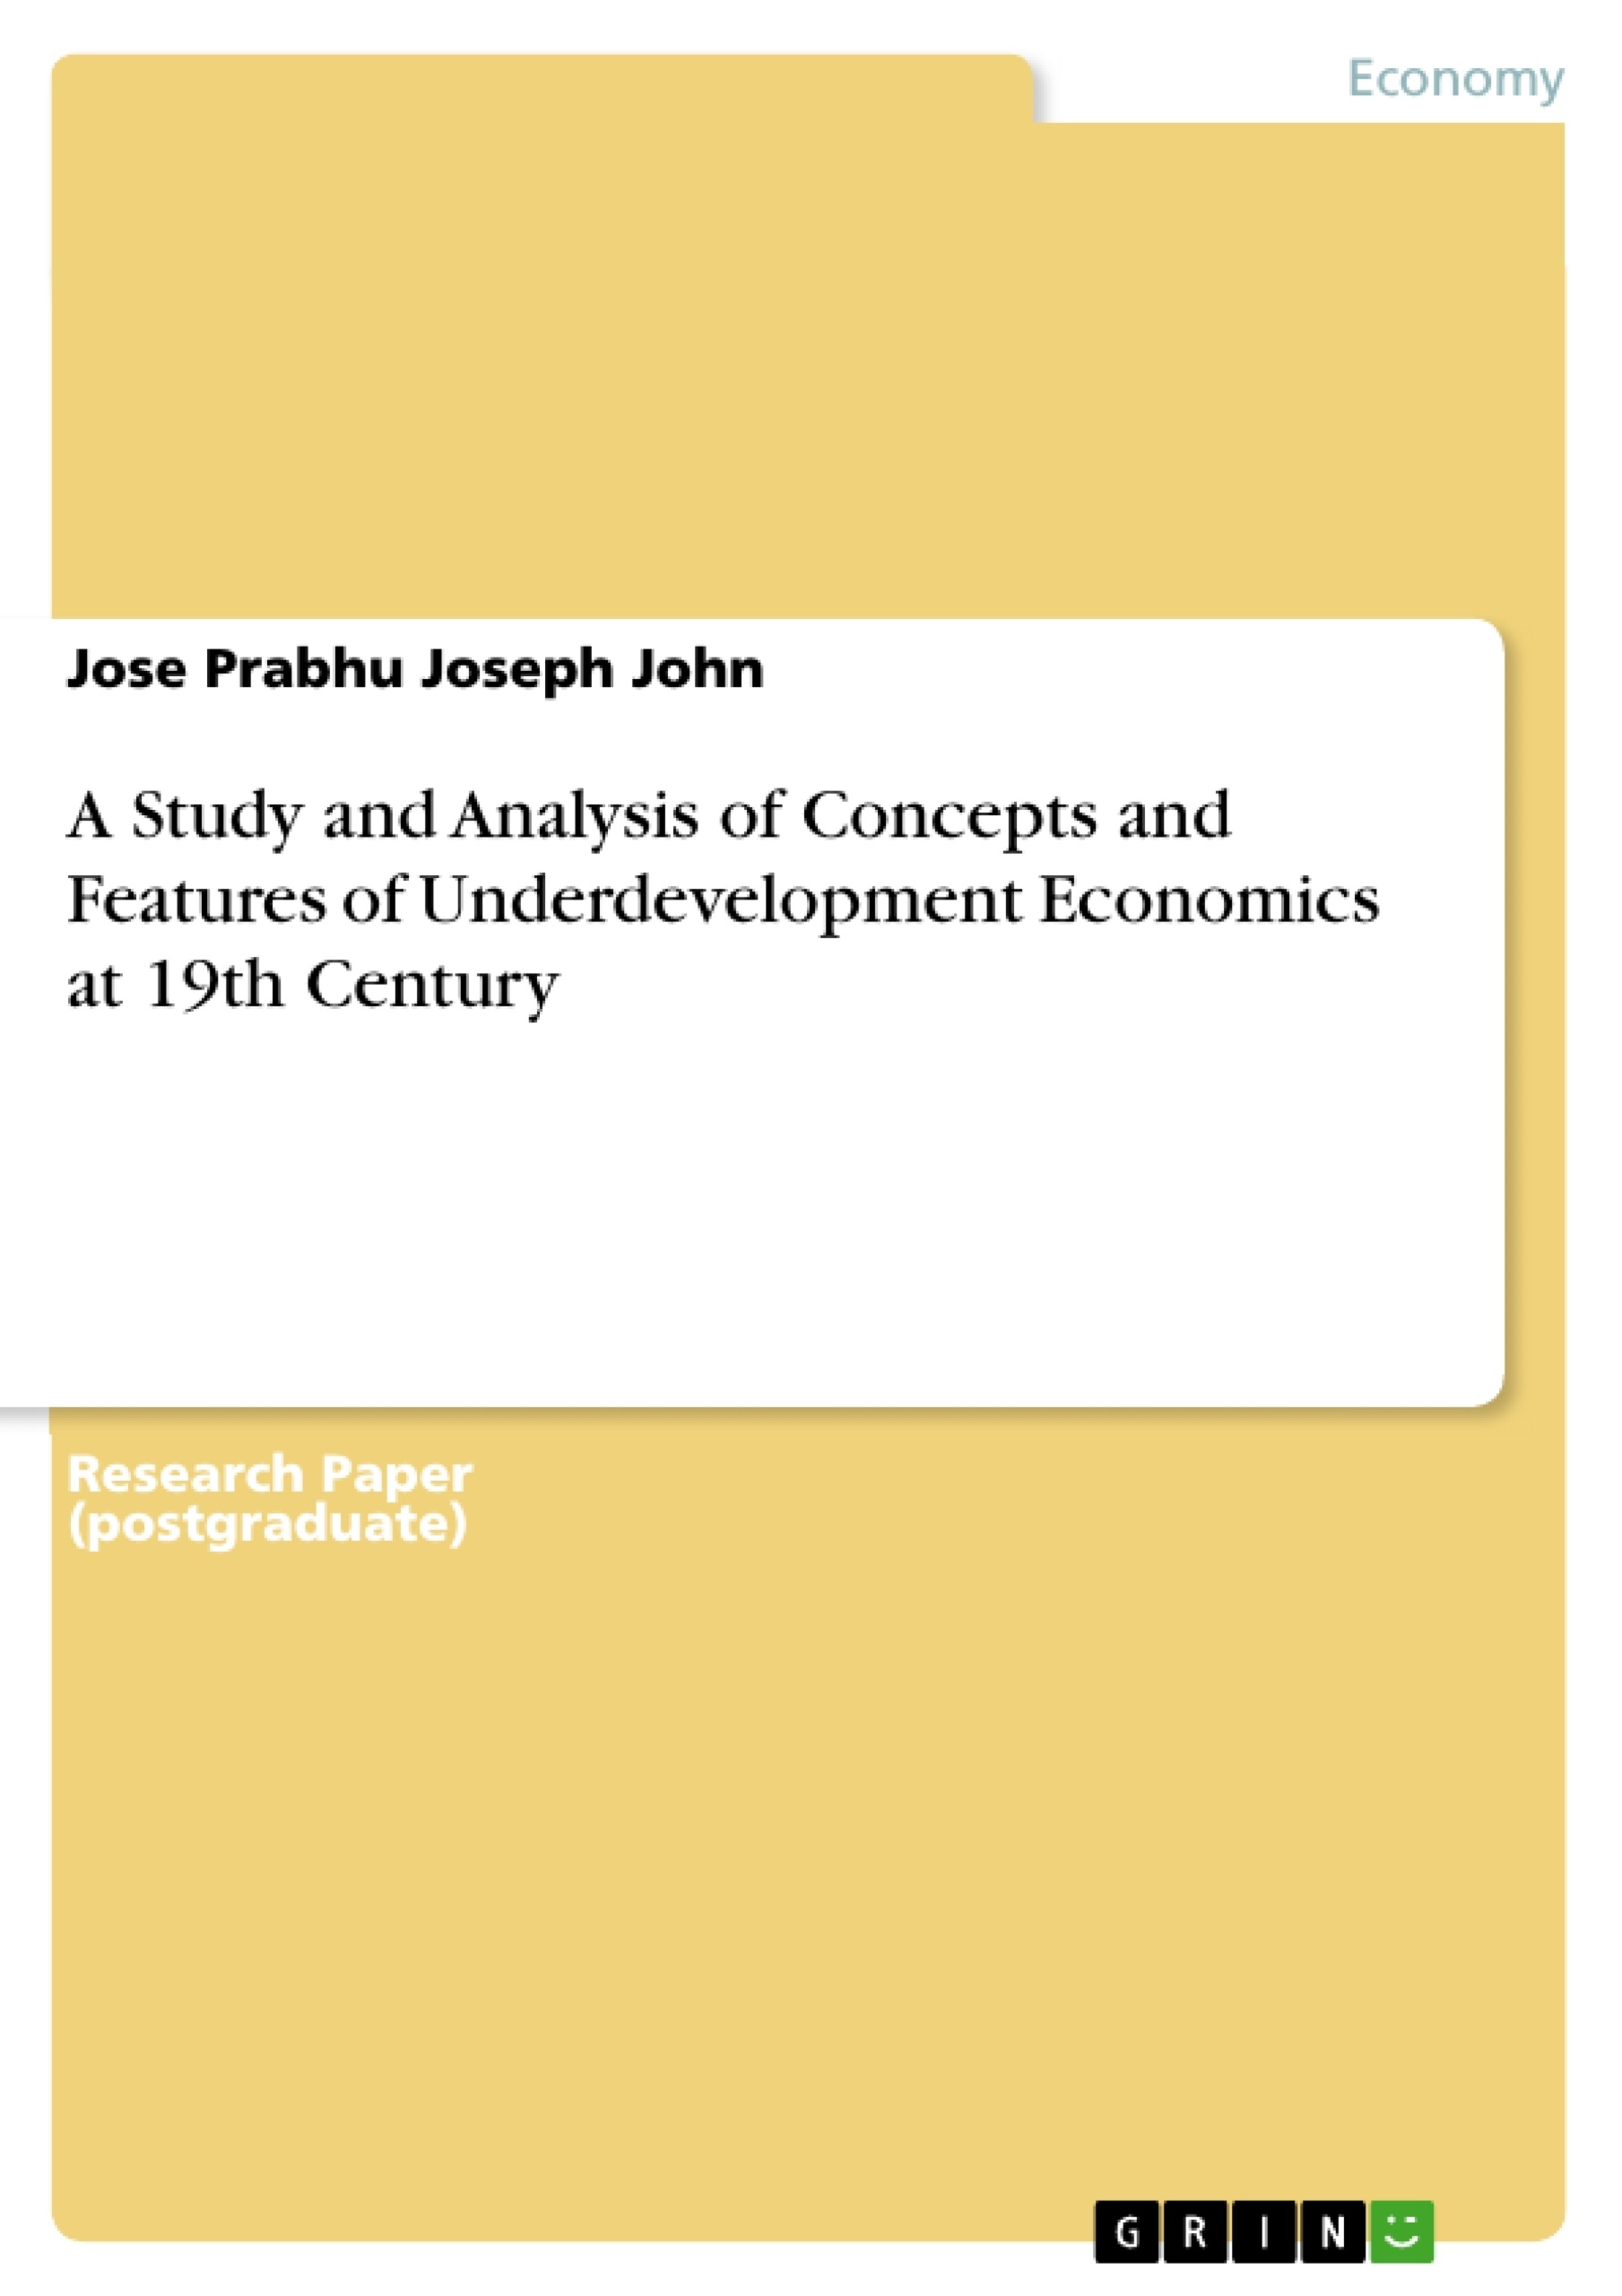 Título: A Study and Analysis of Concepts and Features of Underdevelopment Economics at 19th Century